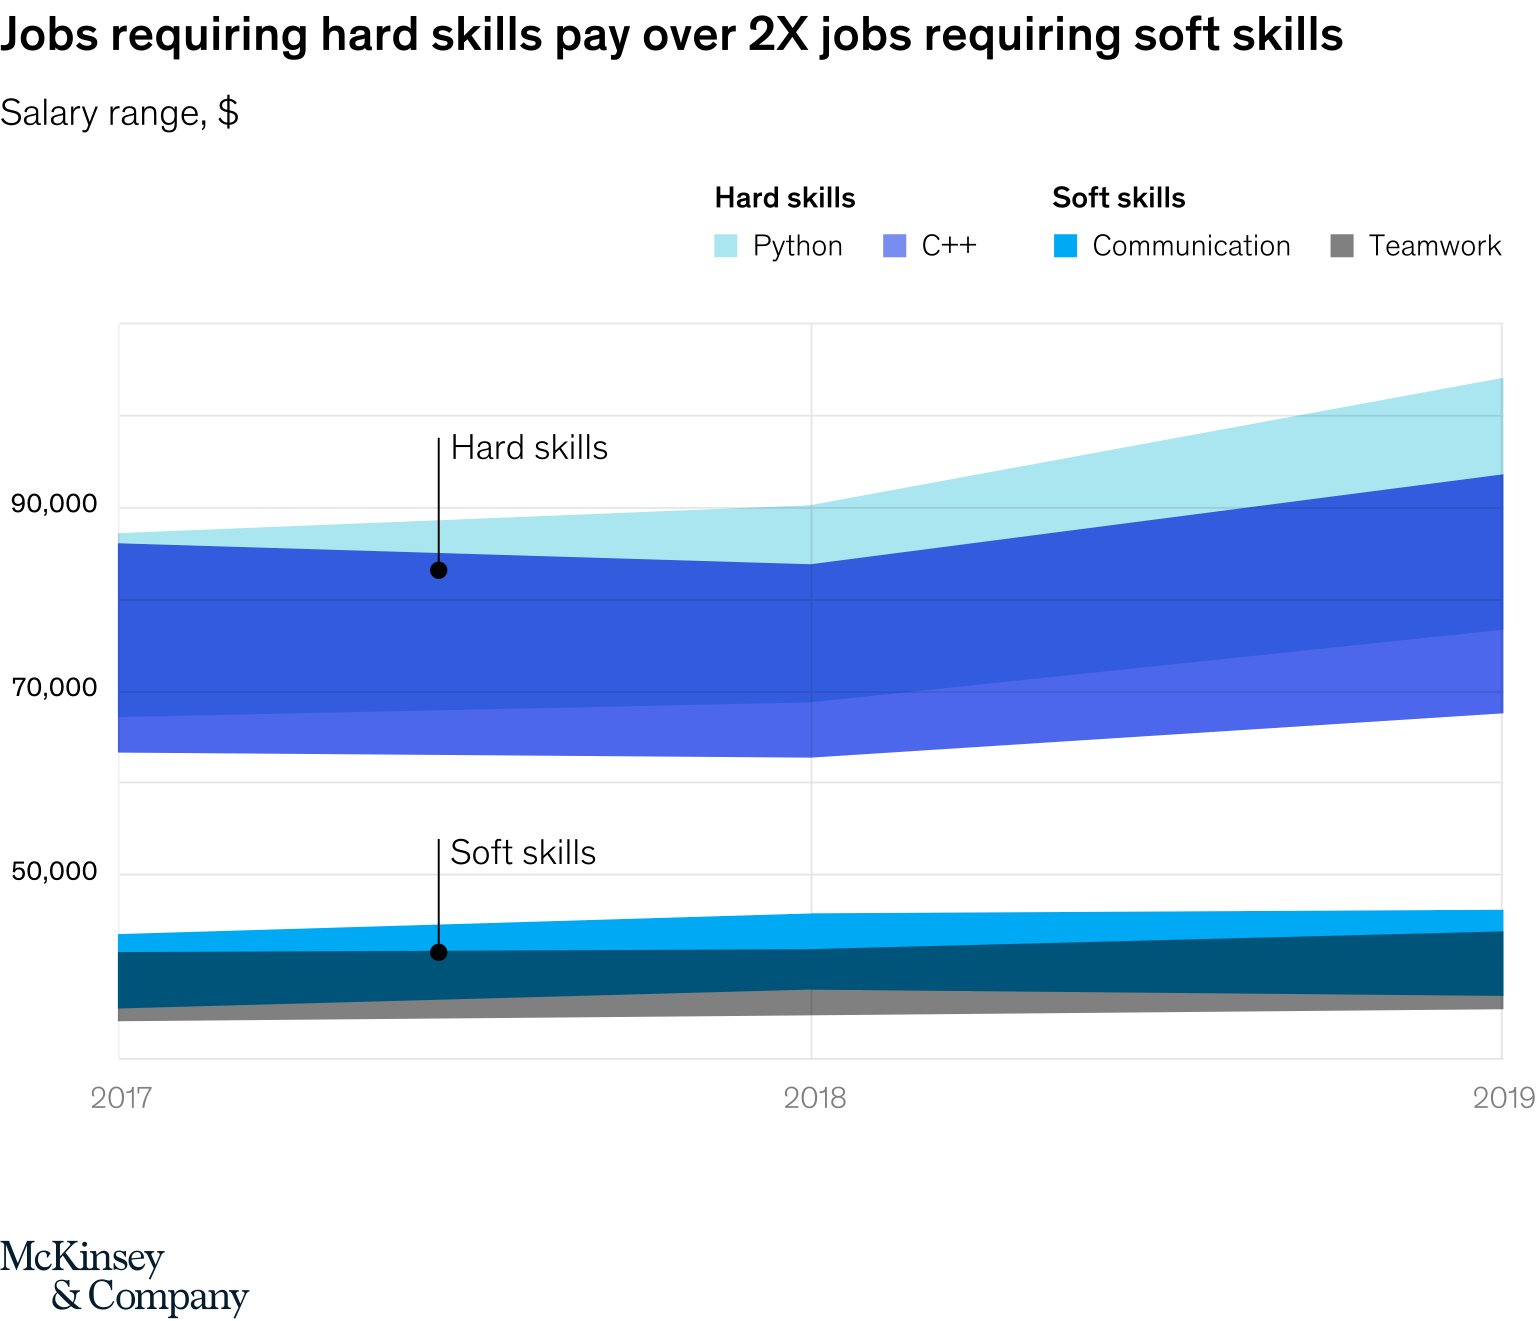 Are hard and soft skills rewarded equally?